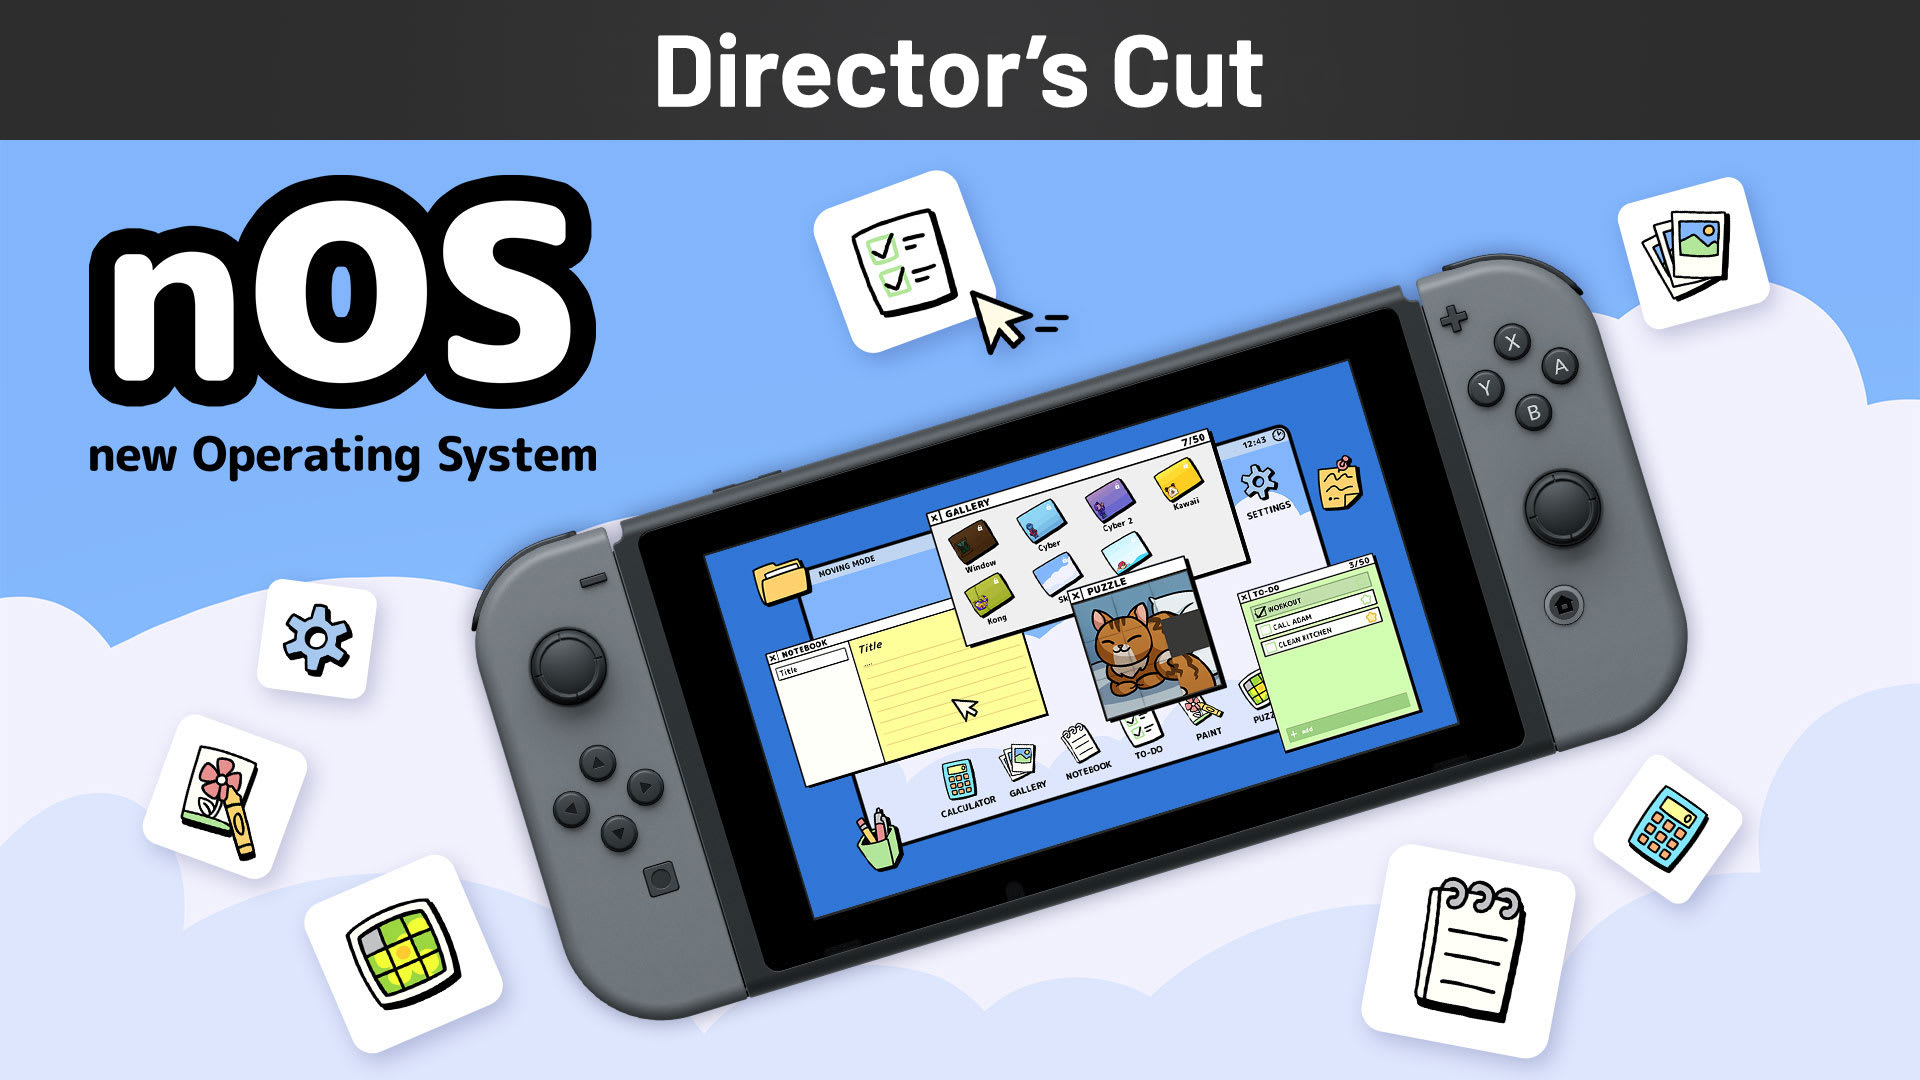 nOS new Operating System Director's Cut